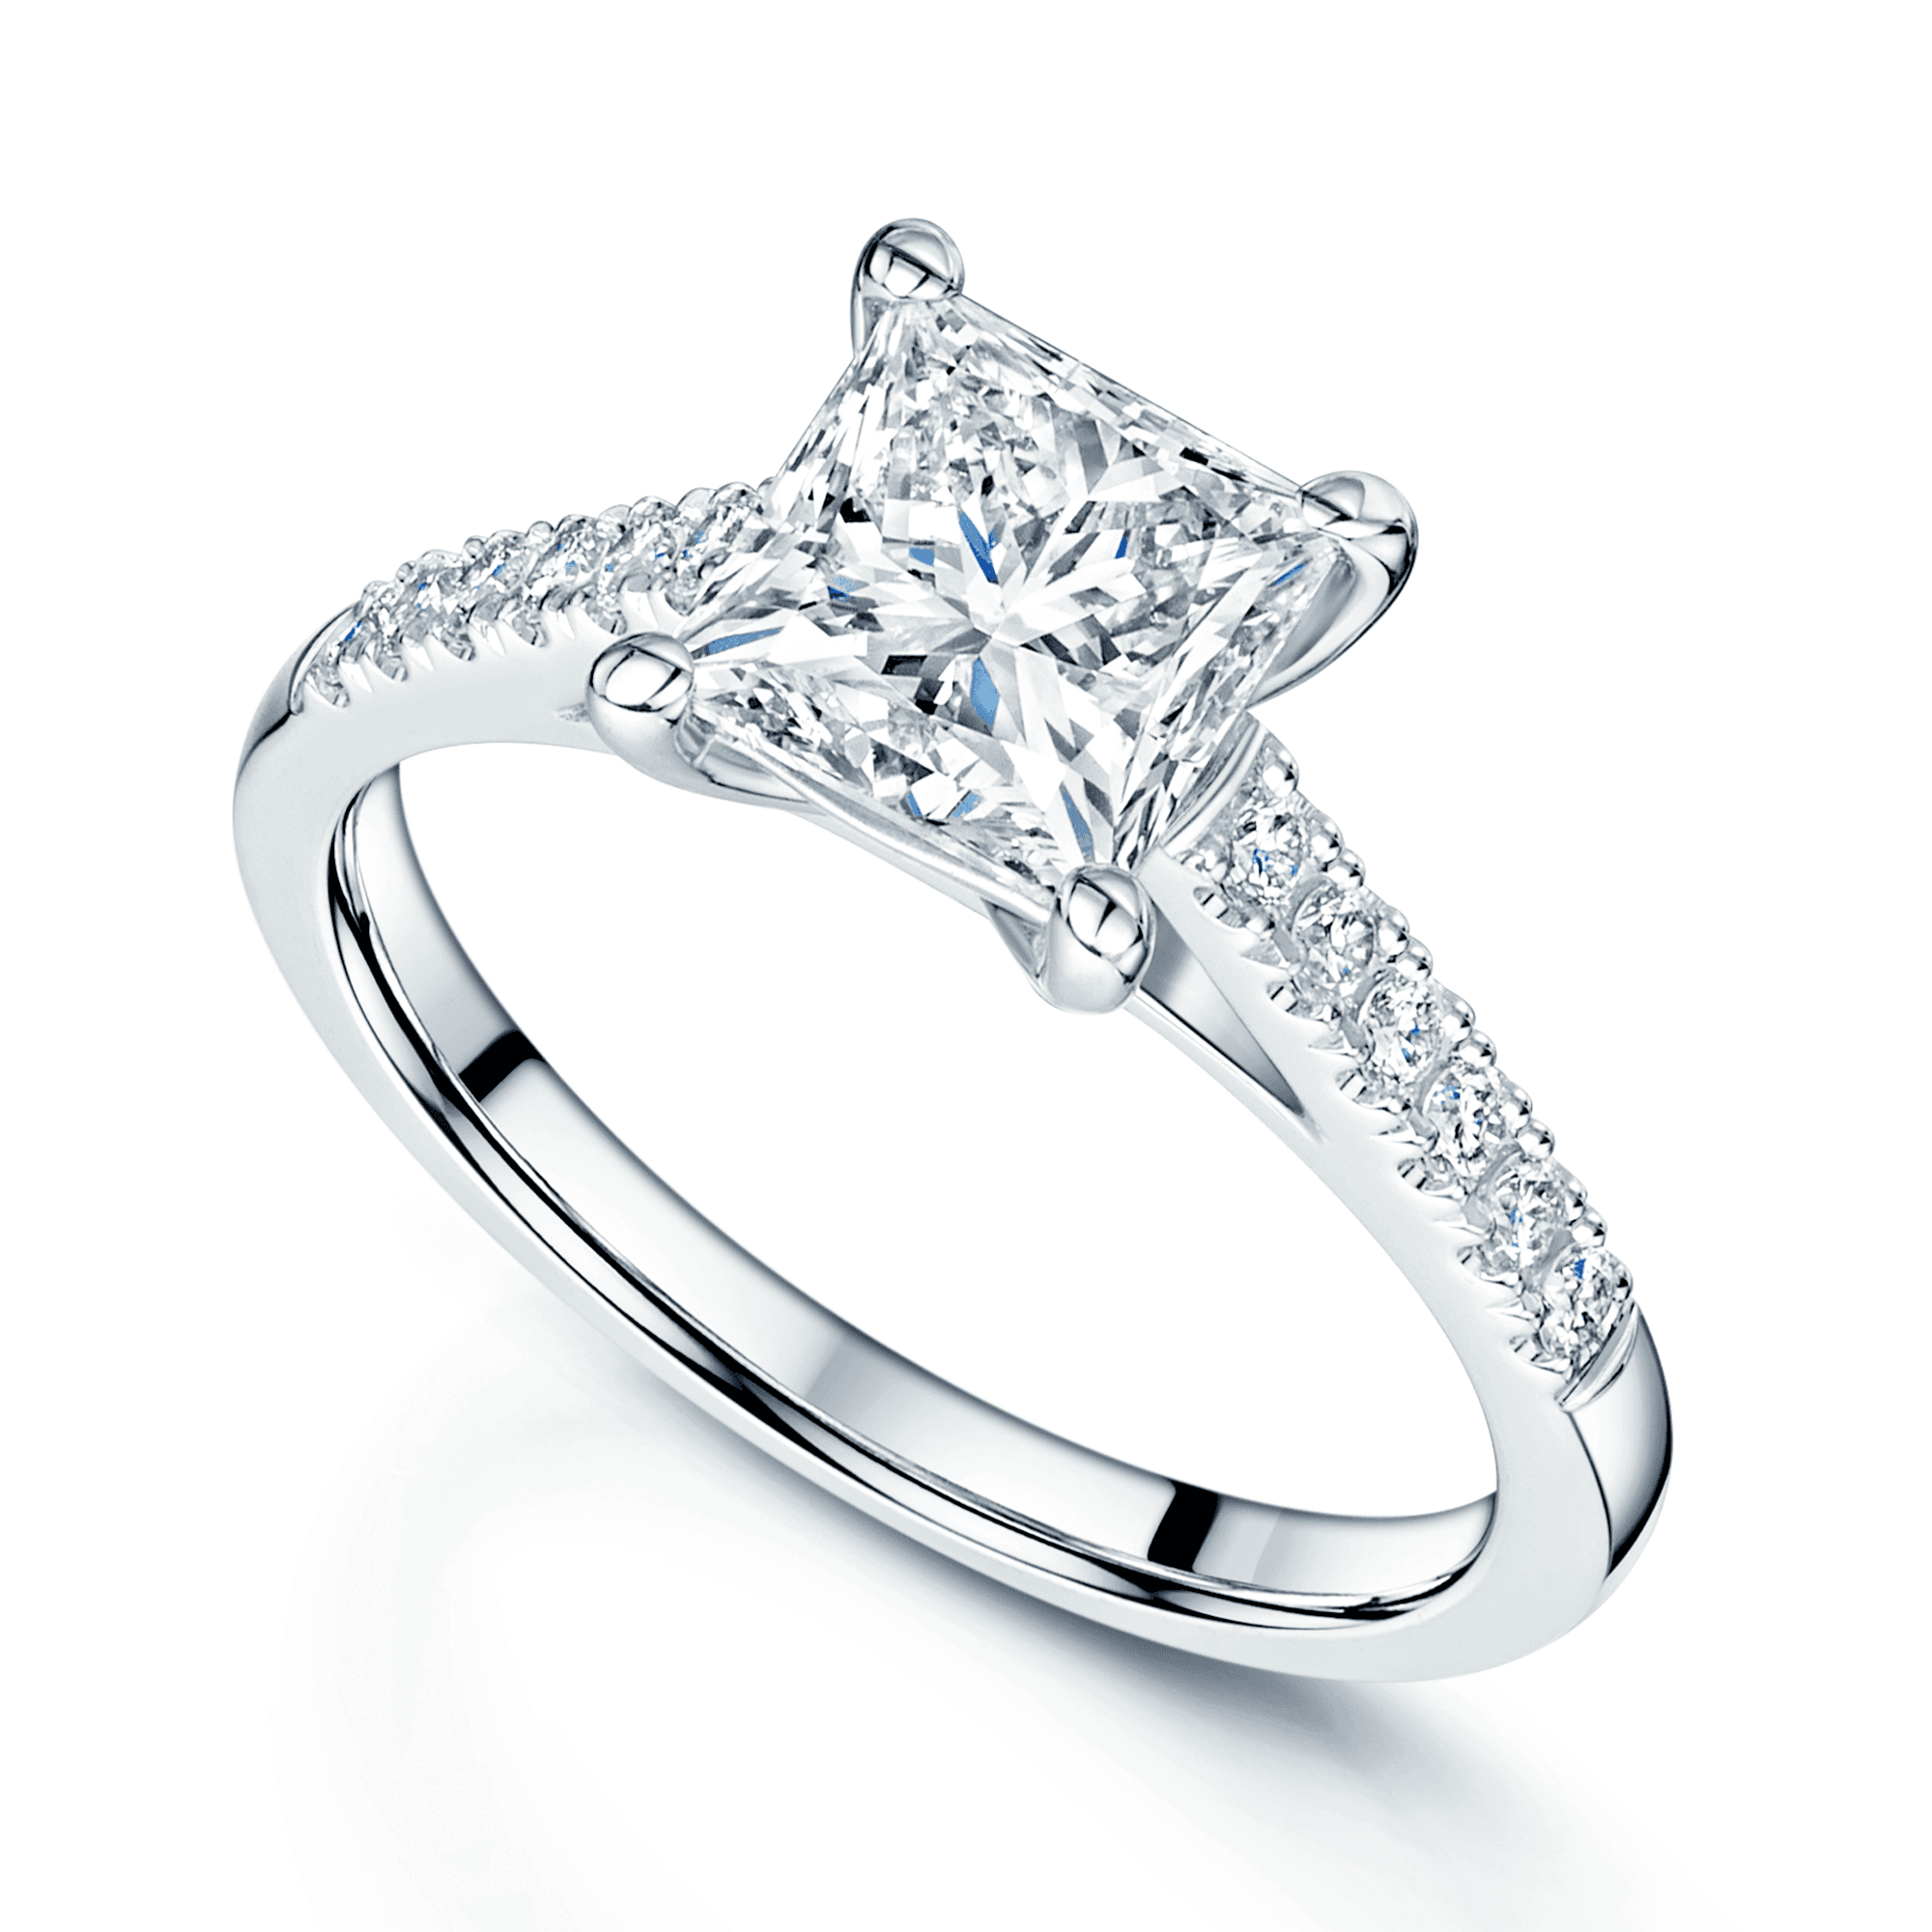 Platinum GIA Certificated Princess Cut Diamond Solitaire Ring With Diamond Set Shoulders